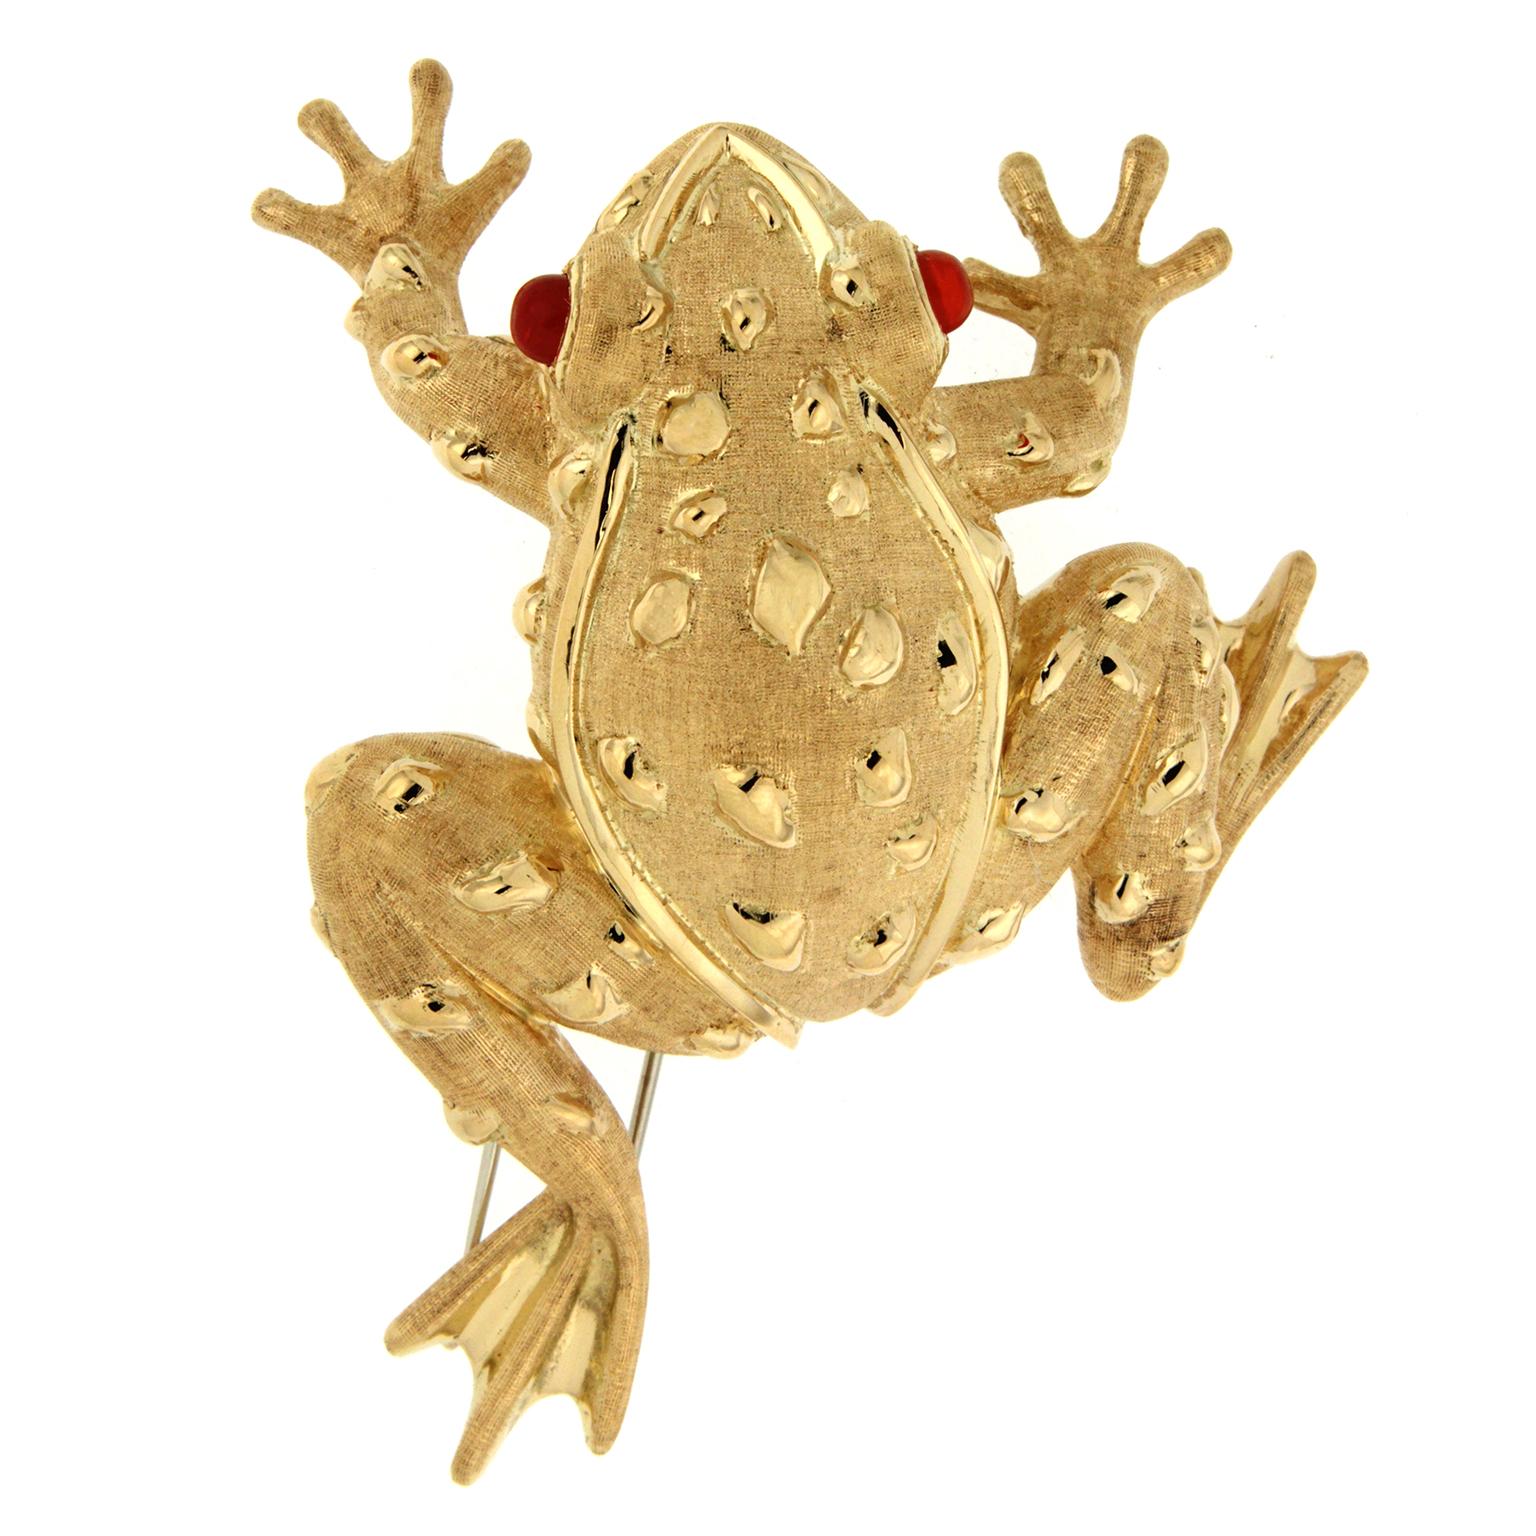 Gold and a prized jewel visualize a frog for this brooch. 18k yellow gold forms the textured body, with craftsmanship to the arms and feet. Slender strands of sleek gold outline the eyes, head, and sides for definition. As a finishing touch, fire